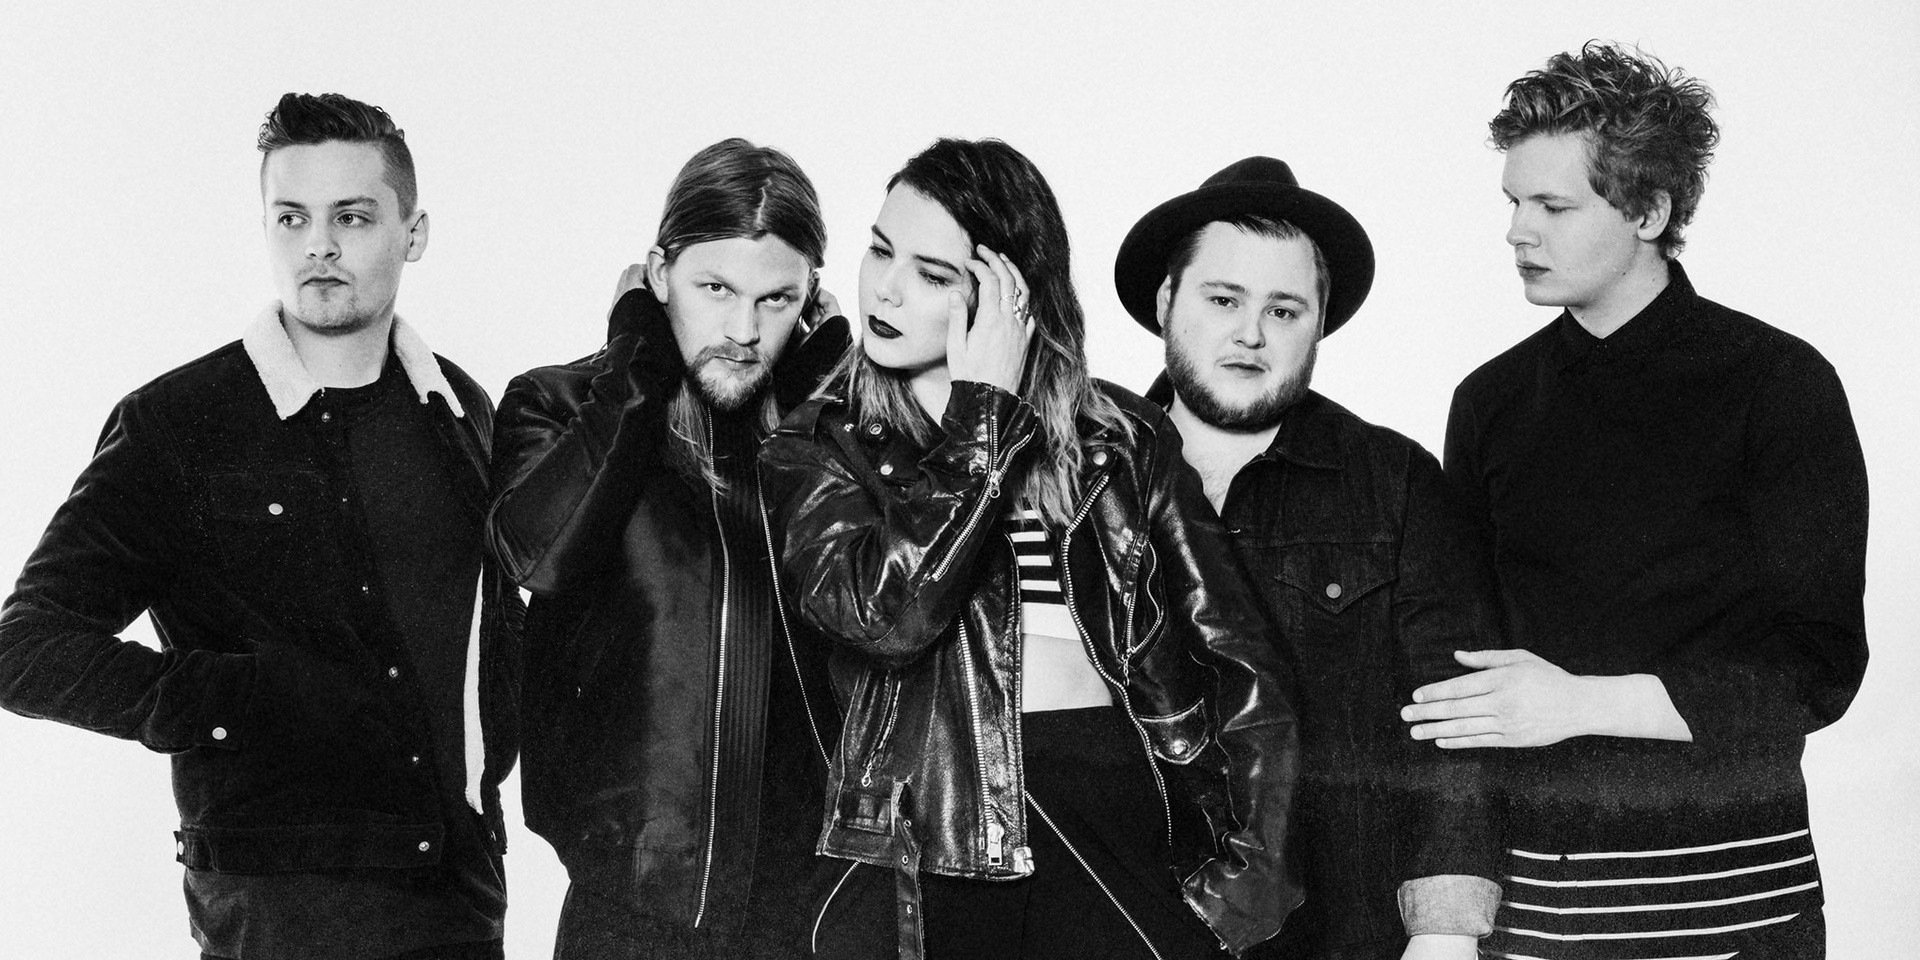 Of Monsters and Men on songwriting: "We try not to force anything"